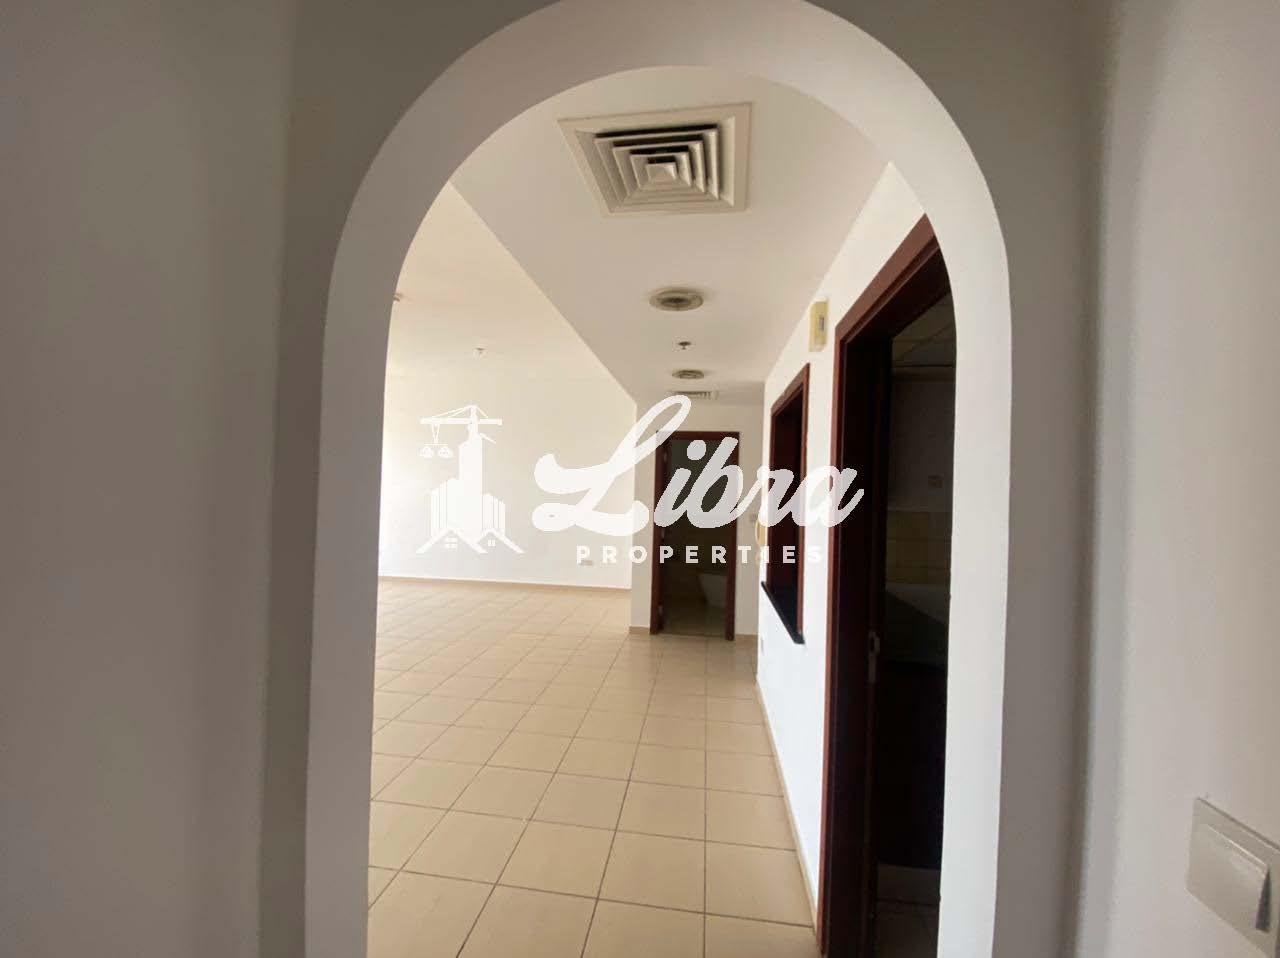 2 bed, 3 bath Apartment for rent in Shams, Jumeirah Beach Residence, Dubai for price AED 135000 yearly 